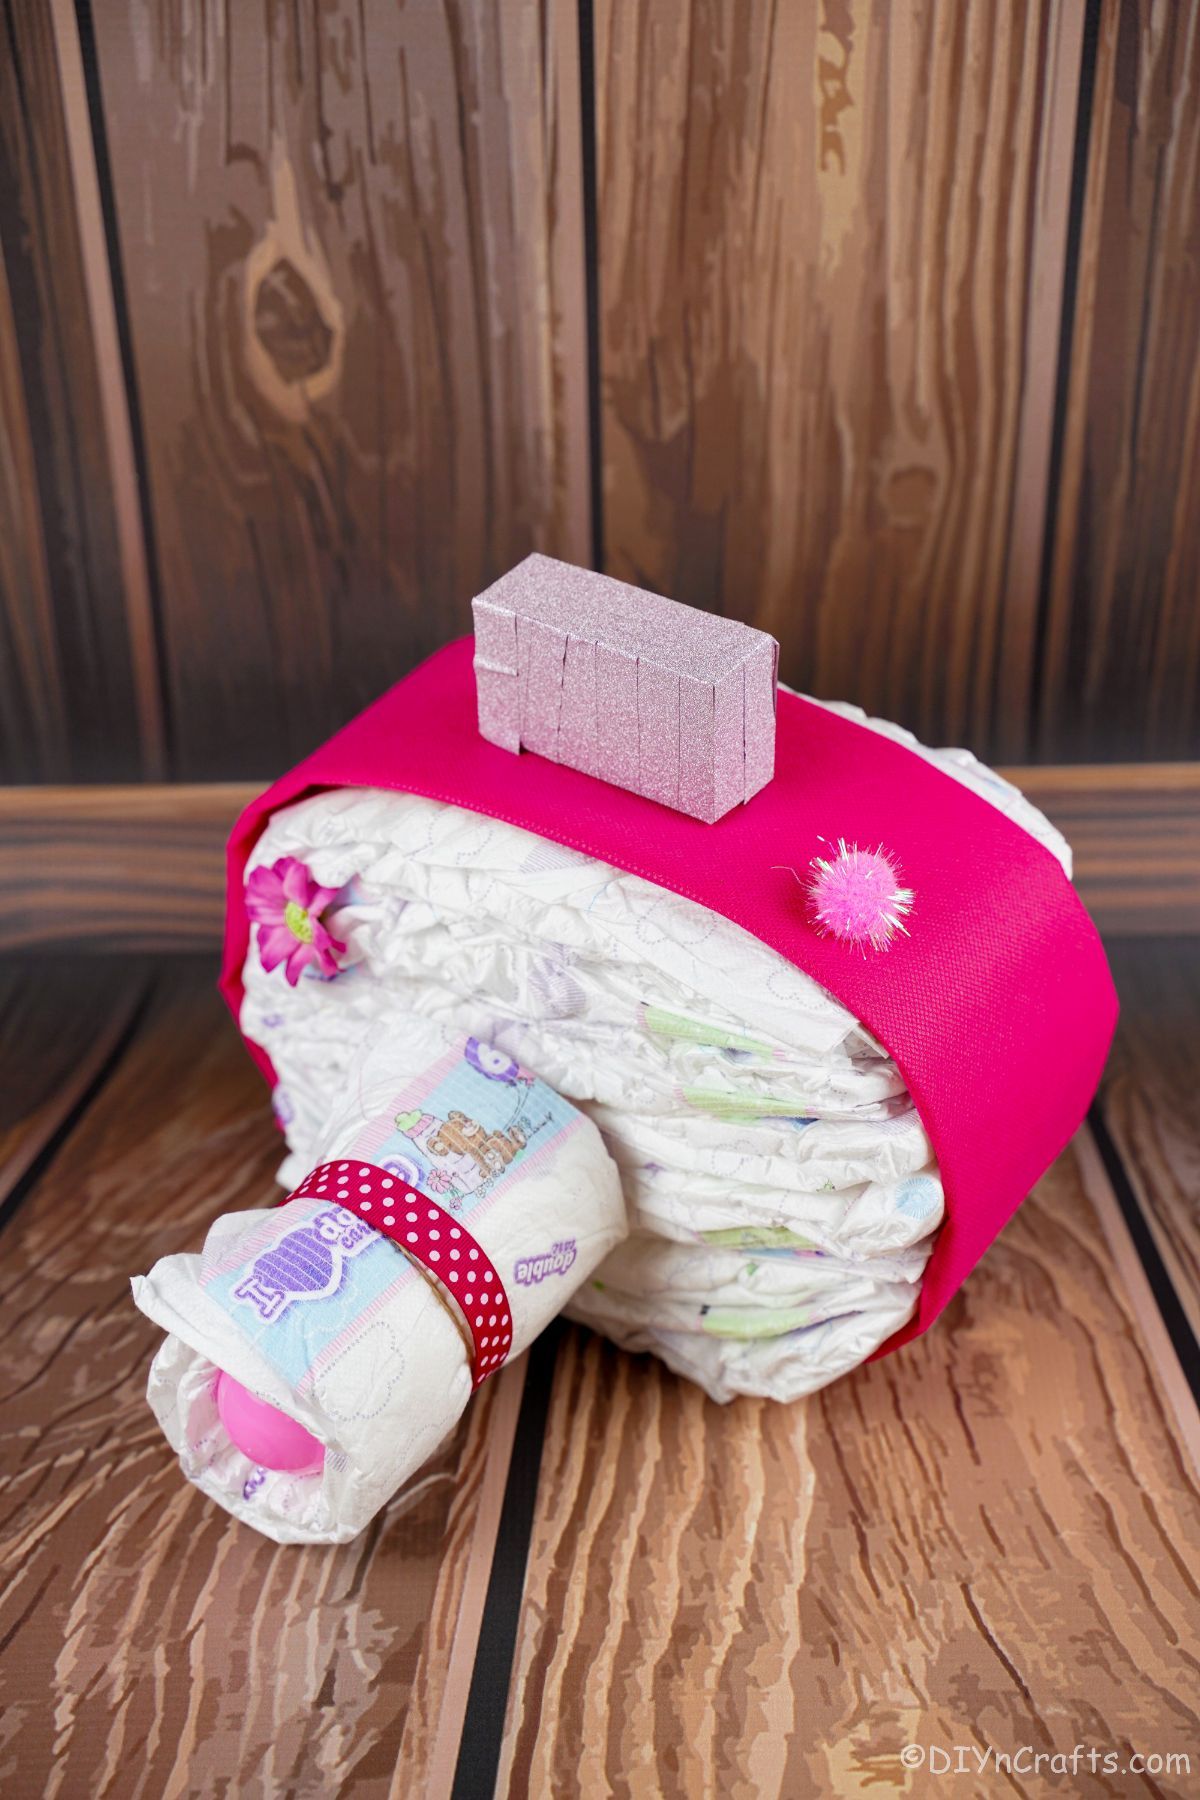 pink diaper cake camera with wood paneling behind it